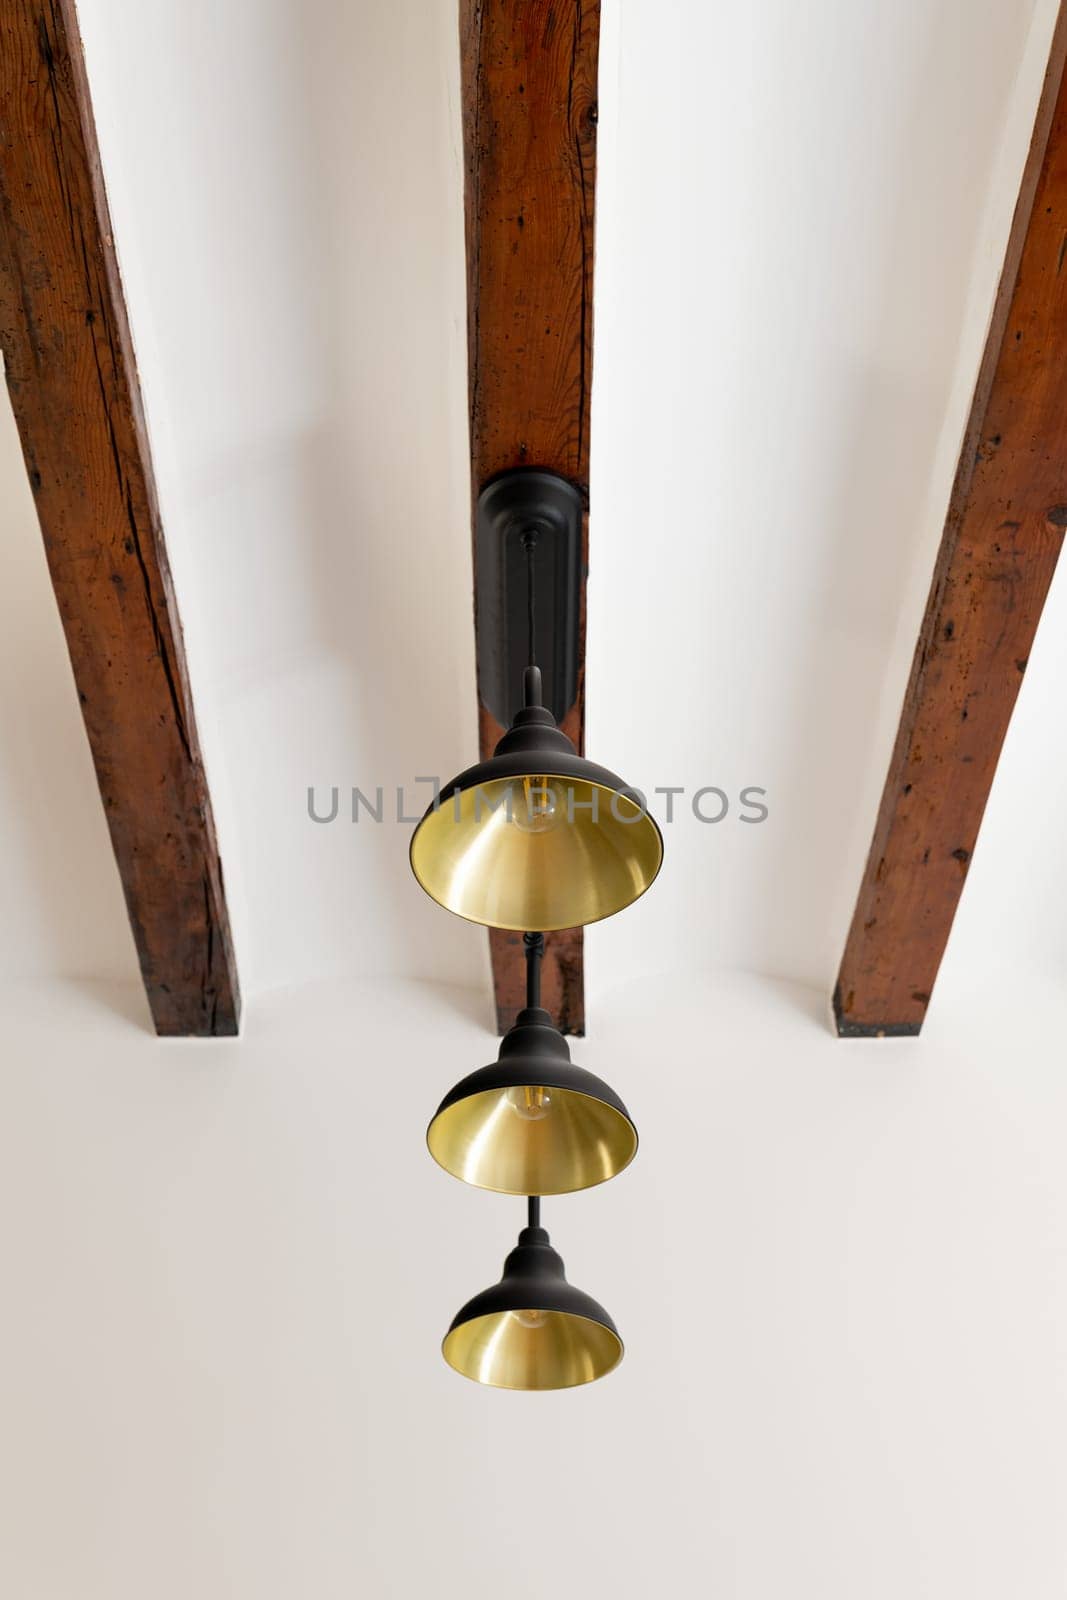 Stylish metal chandelier with light-bulbs on wooden ceiling beam. Contemporary light equipment for interior design and enclosure decor